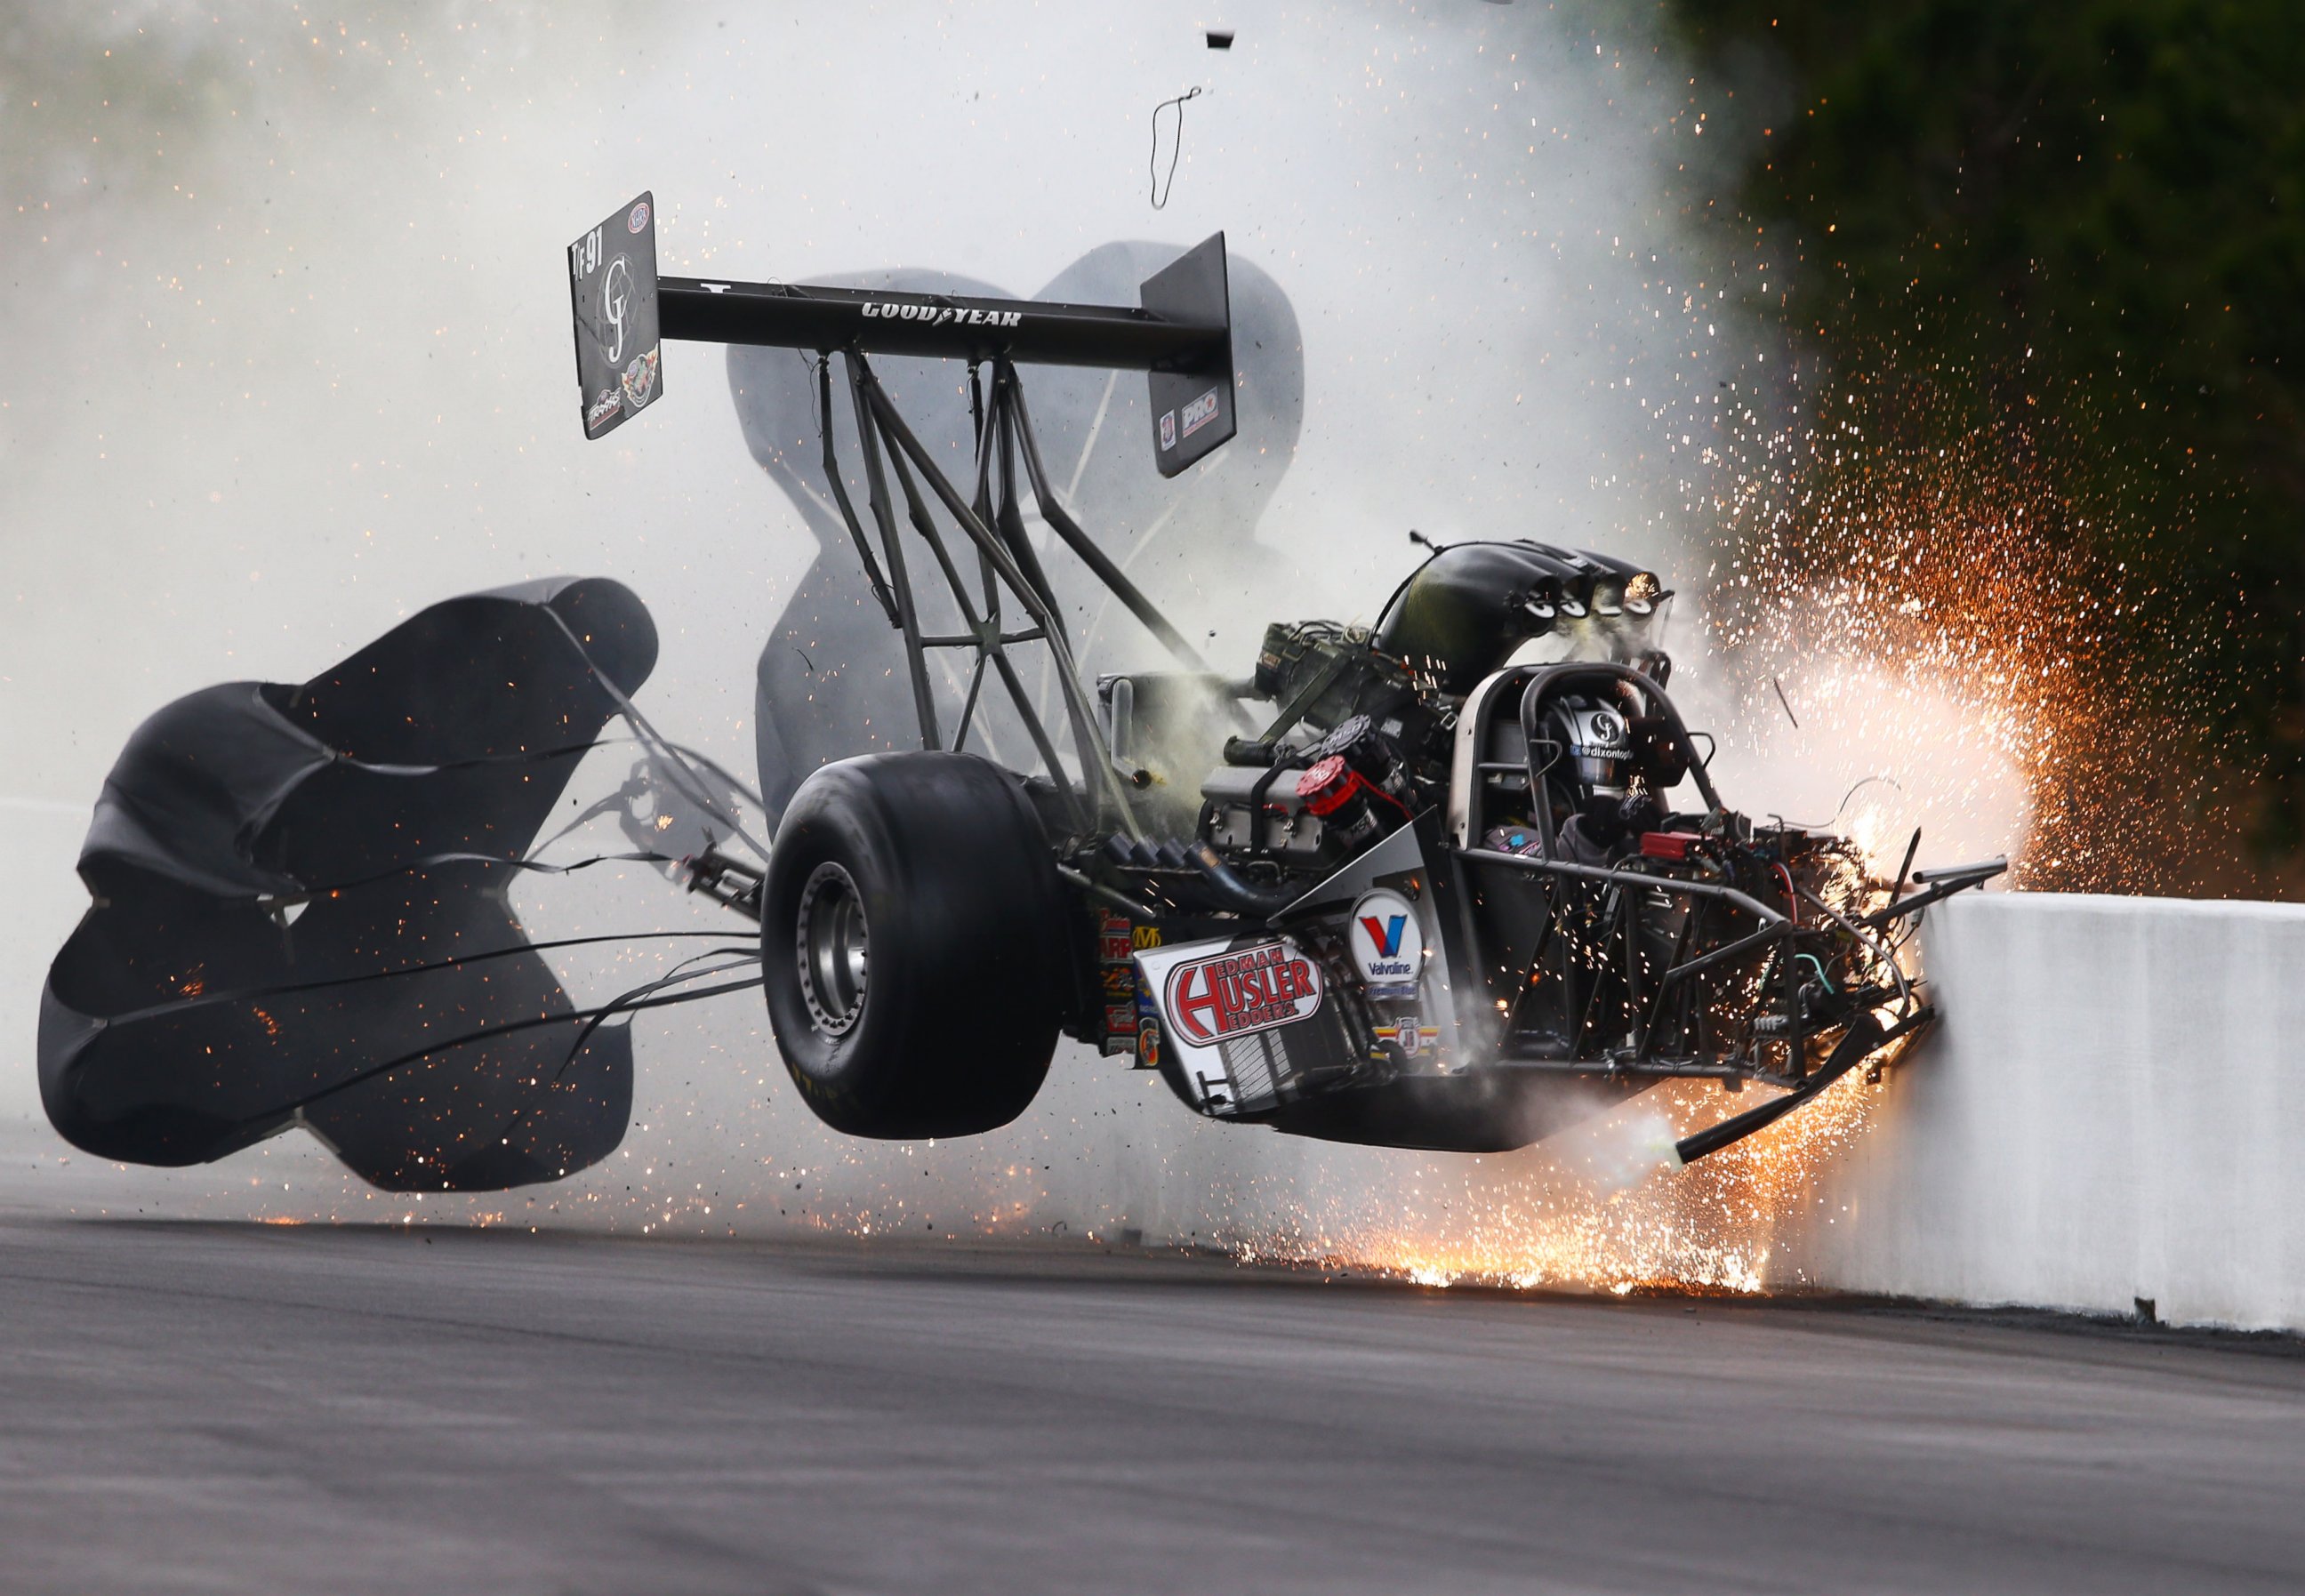 PHOTO: Larry Dixon's Top Fuel car breaks in half at about 280 mph and flies through the air during qualifying for the Amalie Motor Oil NHRA Gatornationals at Auto-Plus Raceway in Gainesville, Fla., March 14, 2015.